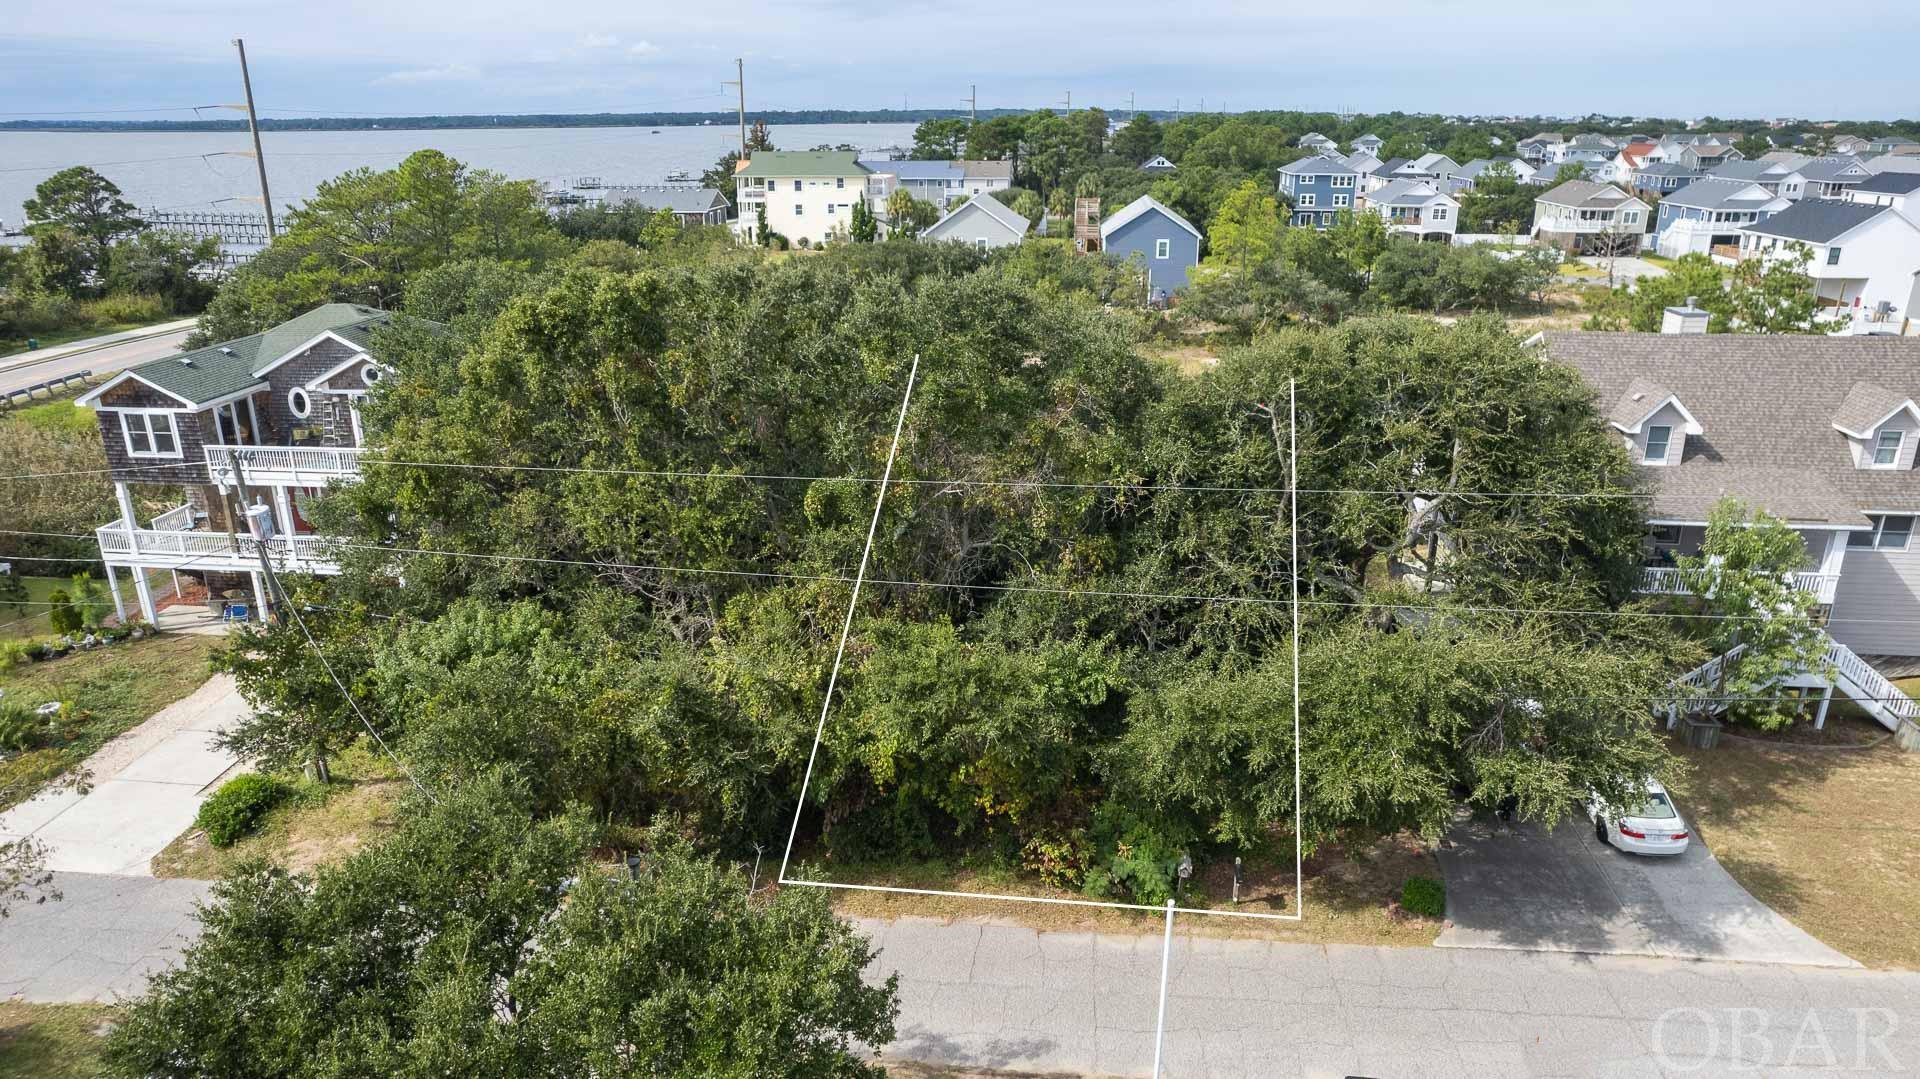 Build and own your own OBX cottage! This 50 x 100 lot is close to all the Outer Banks has to offer. Located steps from Bay Drive and the multi-use path, you may even catch a sliver of sound view from your new porch. The lot has undergone all of the wetland mitigation and is ready for your vision! Please call your agent to discuss the mitigation process and don't miss out on this opportunity!